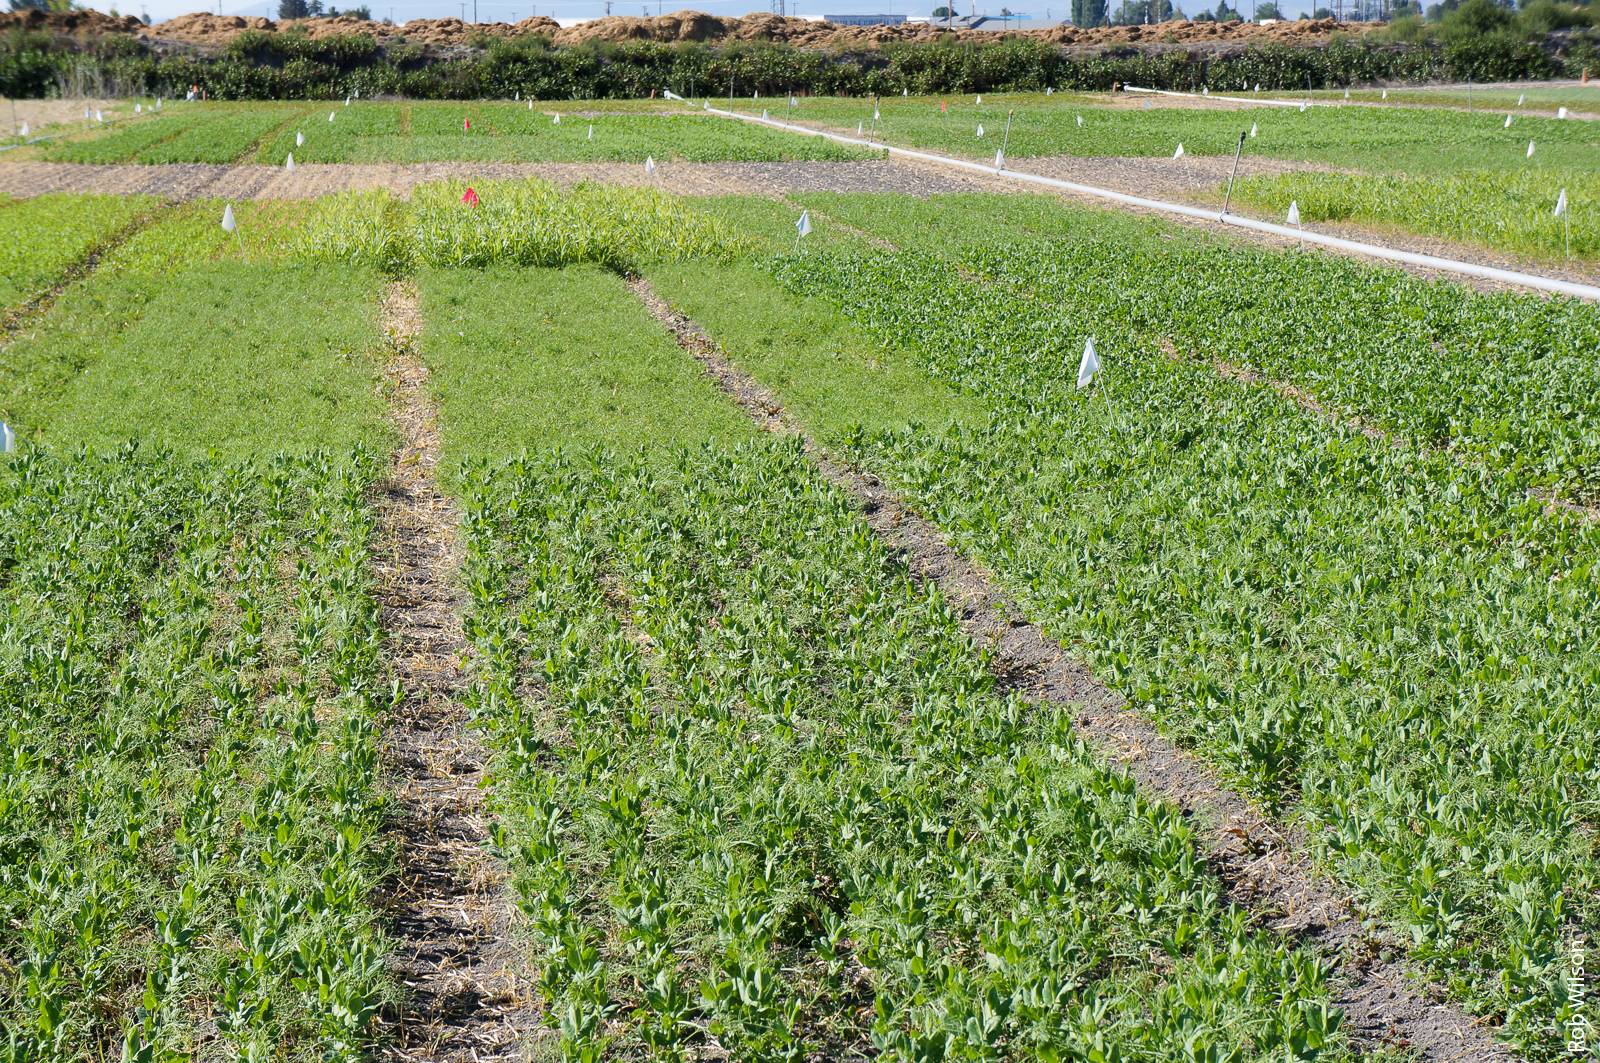 Researchers at IREC are evaluating different organic amendment and cover crop treatments for organic potato production.